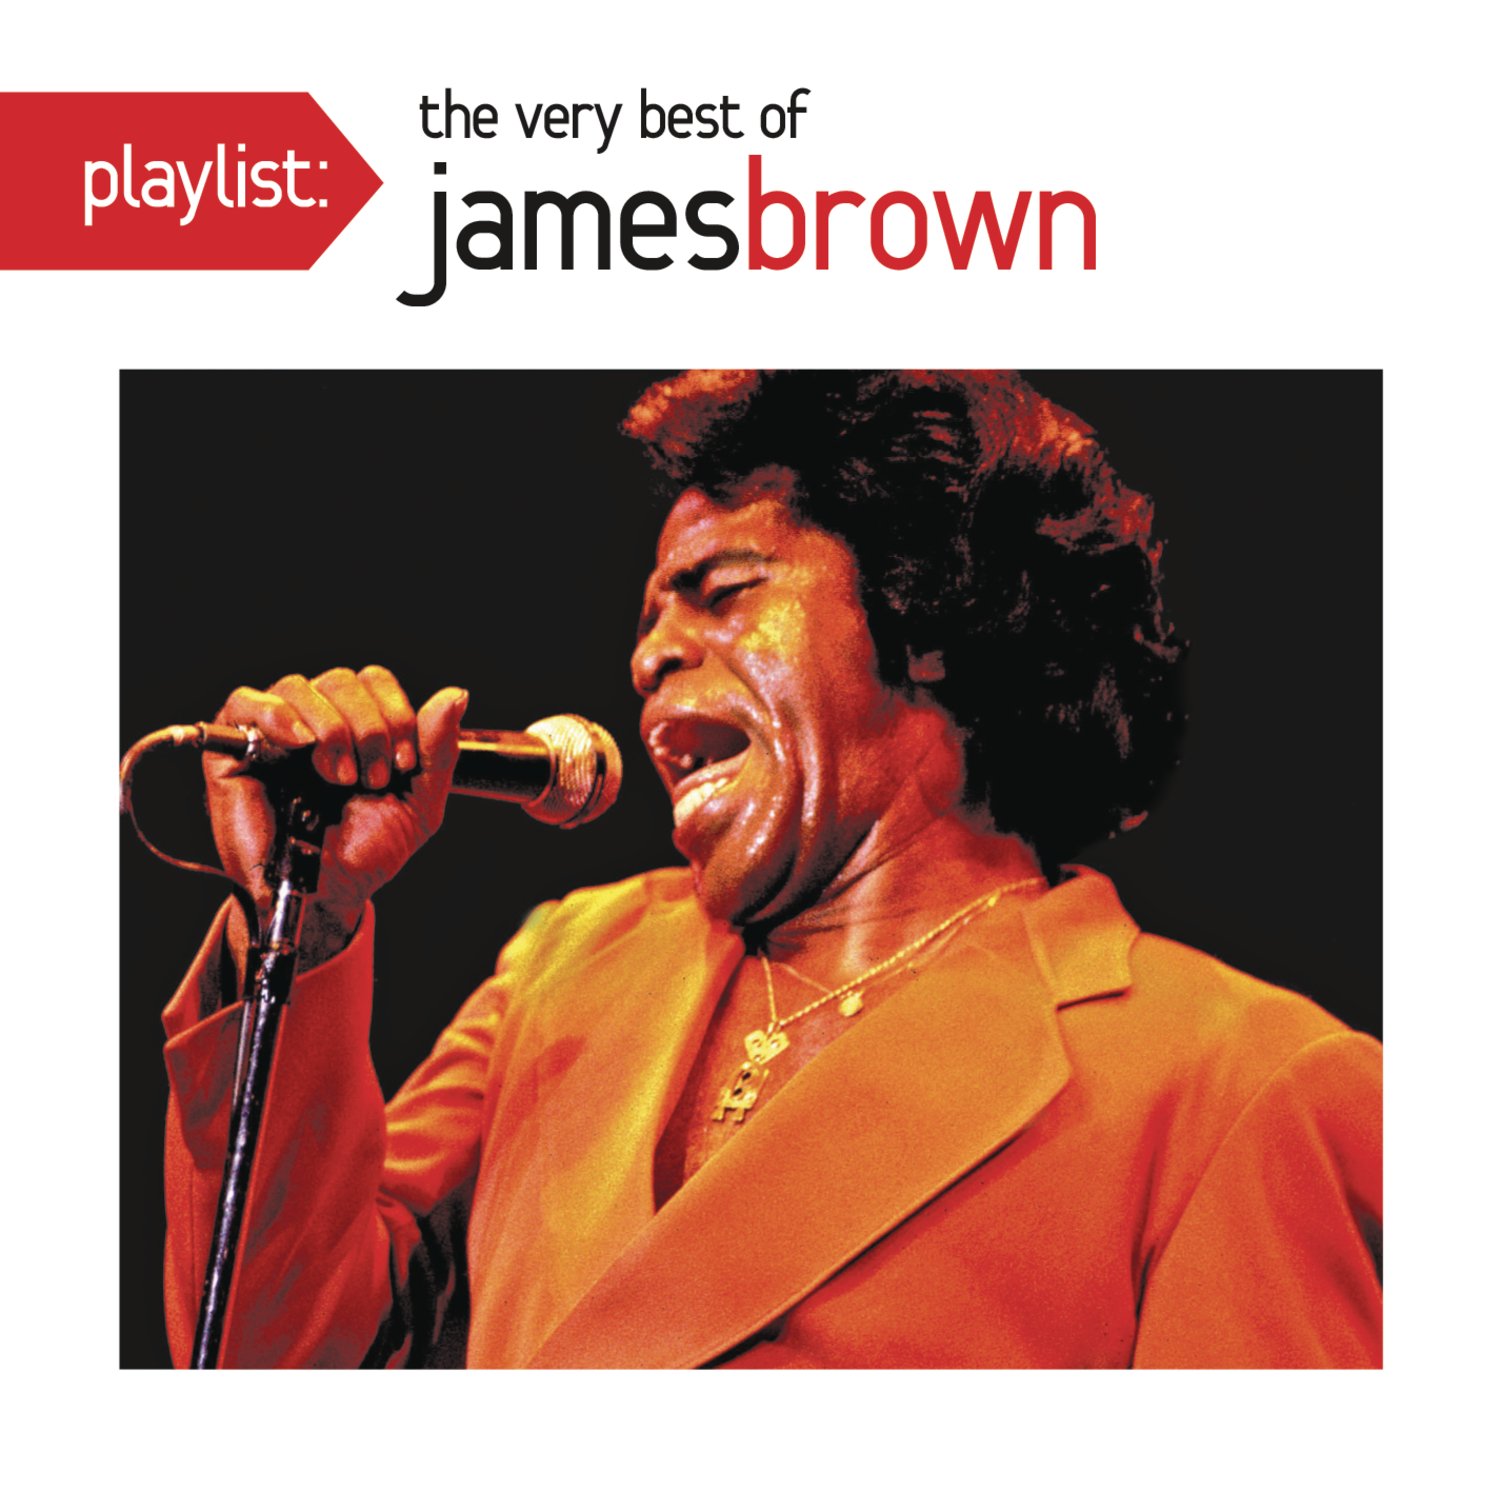 The Hardest Working Man in Show Business: A Tribute to James Brown’s Musical Genius